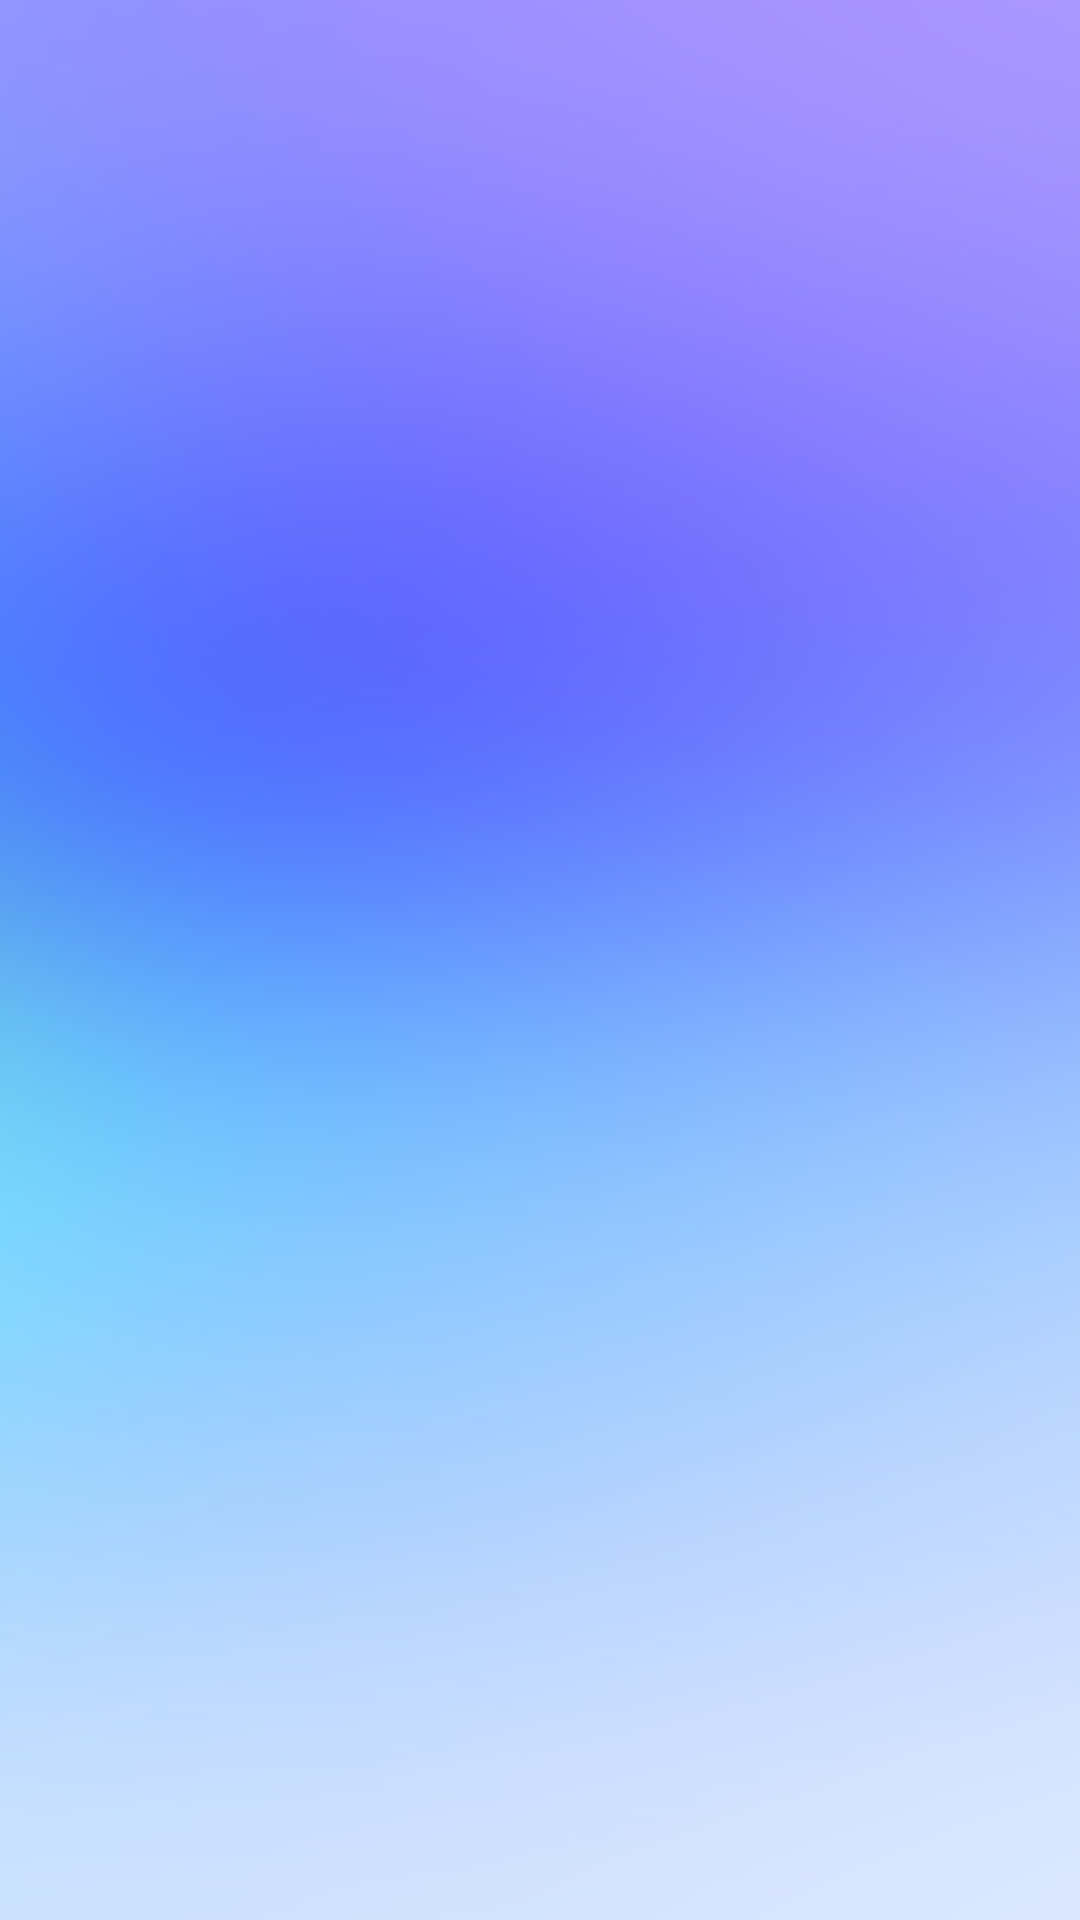 Blue Ombre Background Light Purple To White Surface